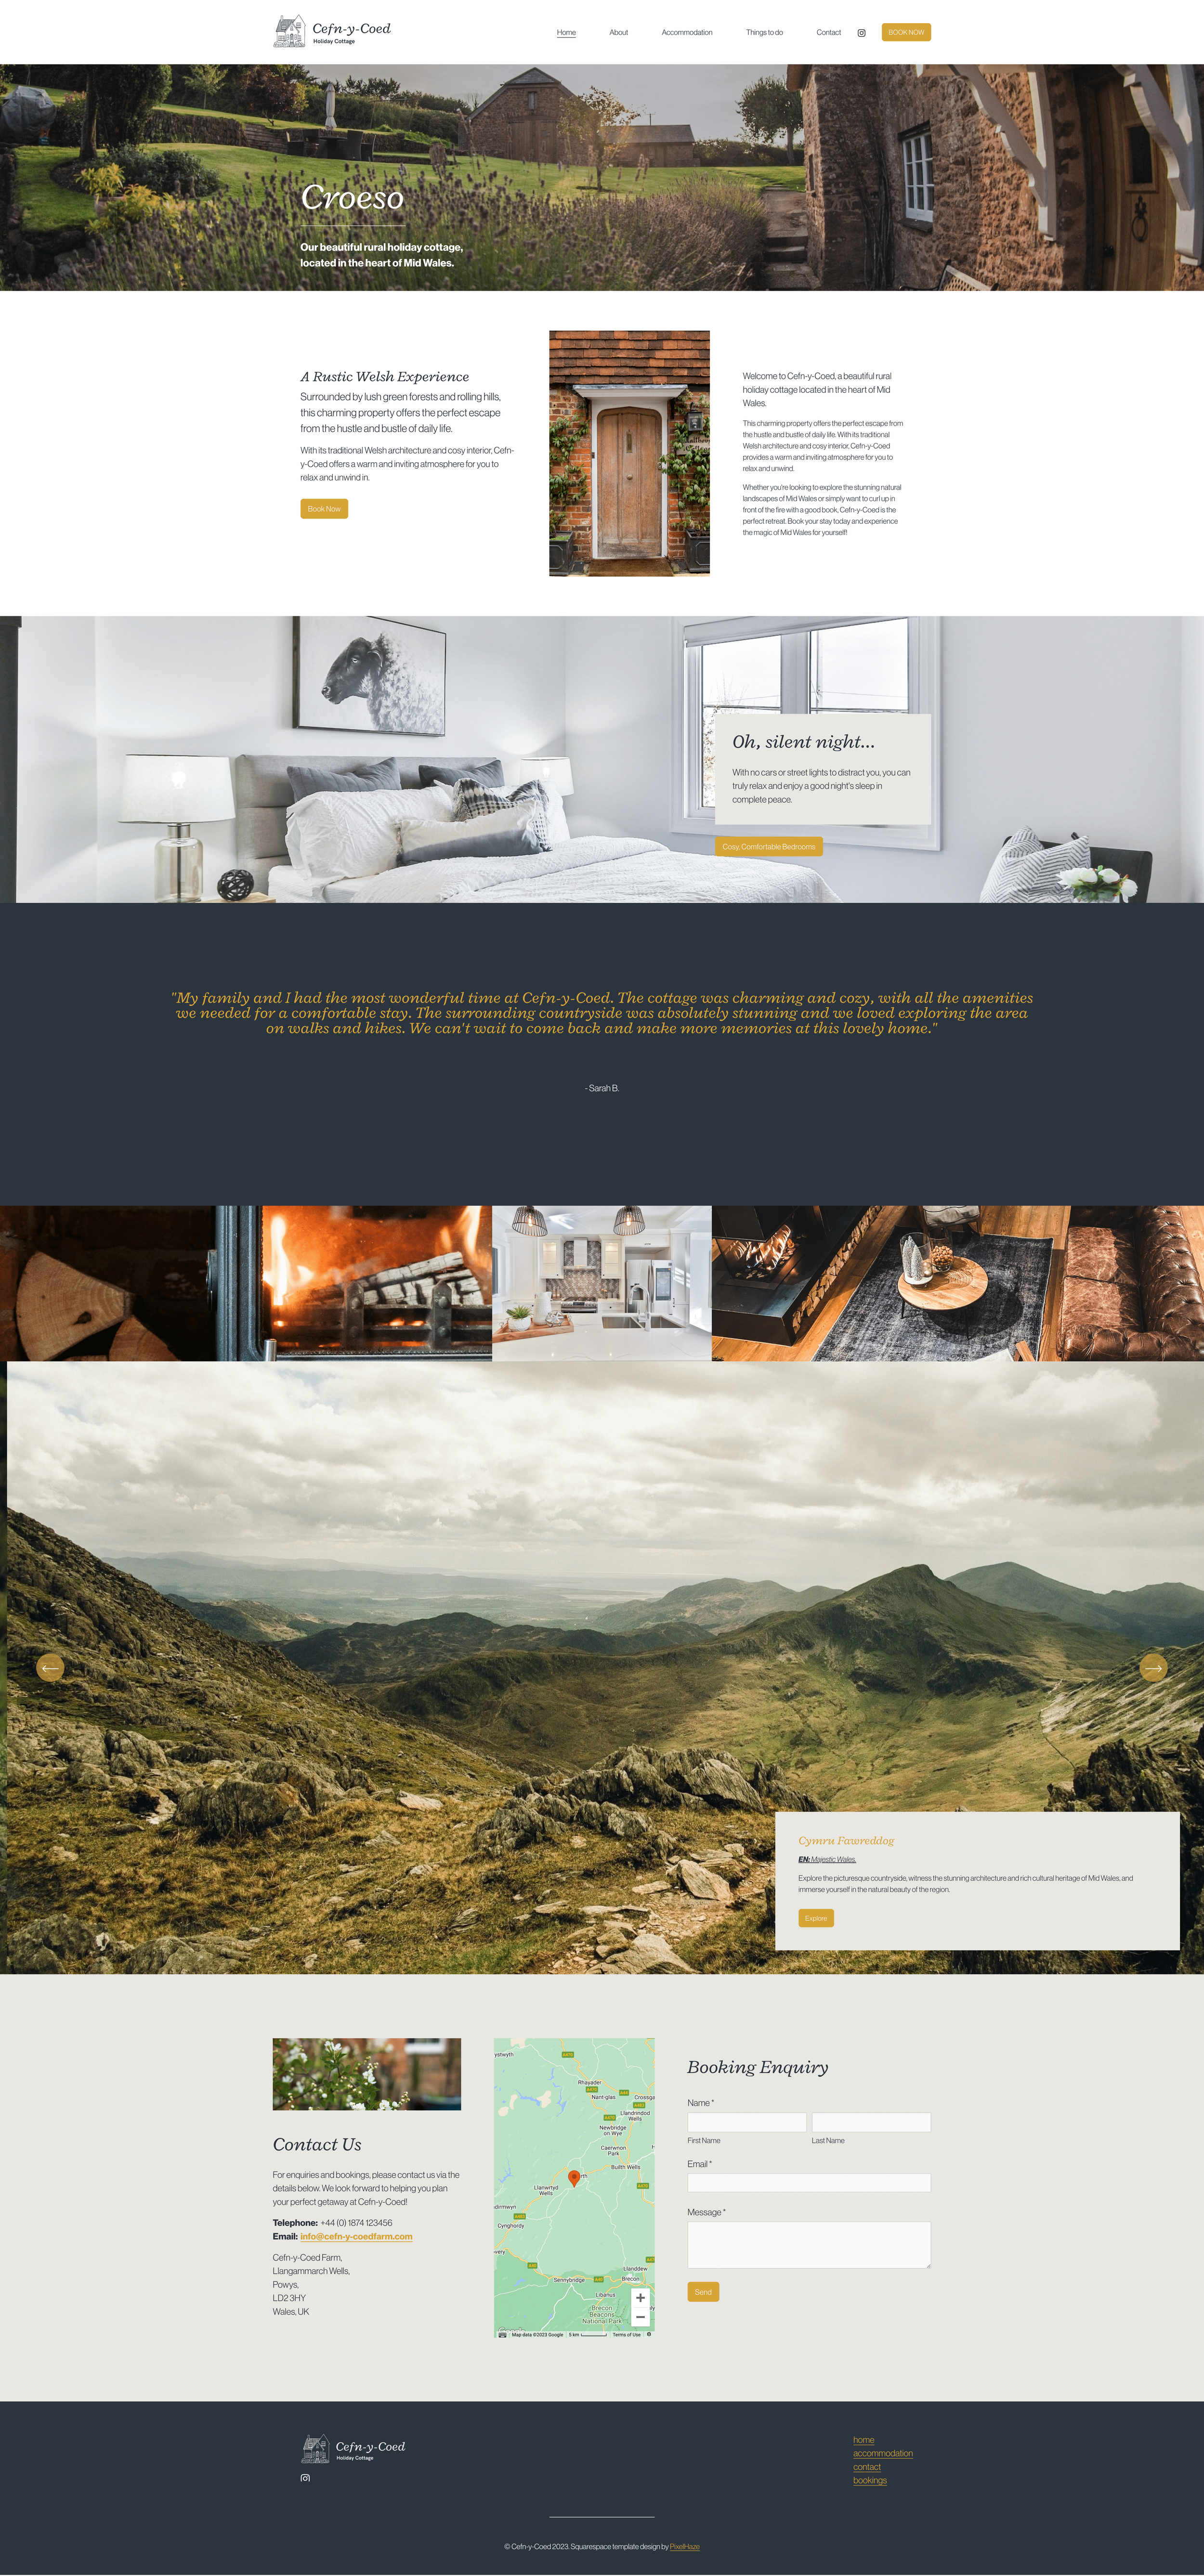 Cefn-y-Coed+Holiday+Cottage+Squarespace+template+screenshot.png